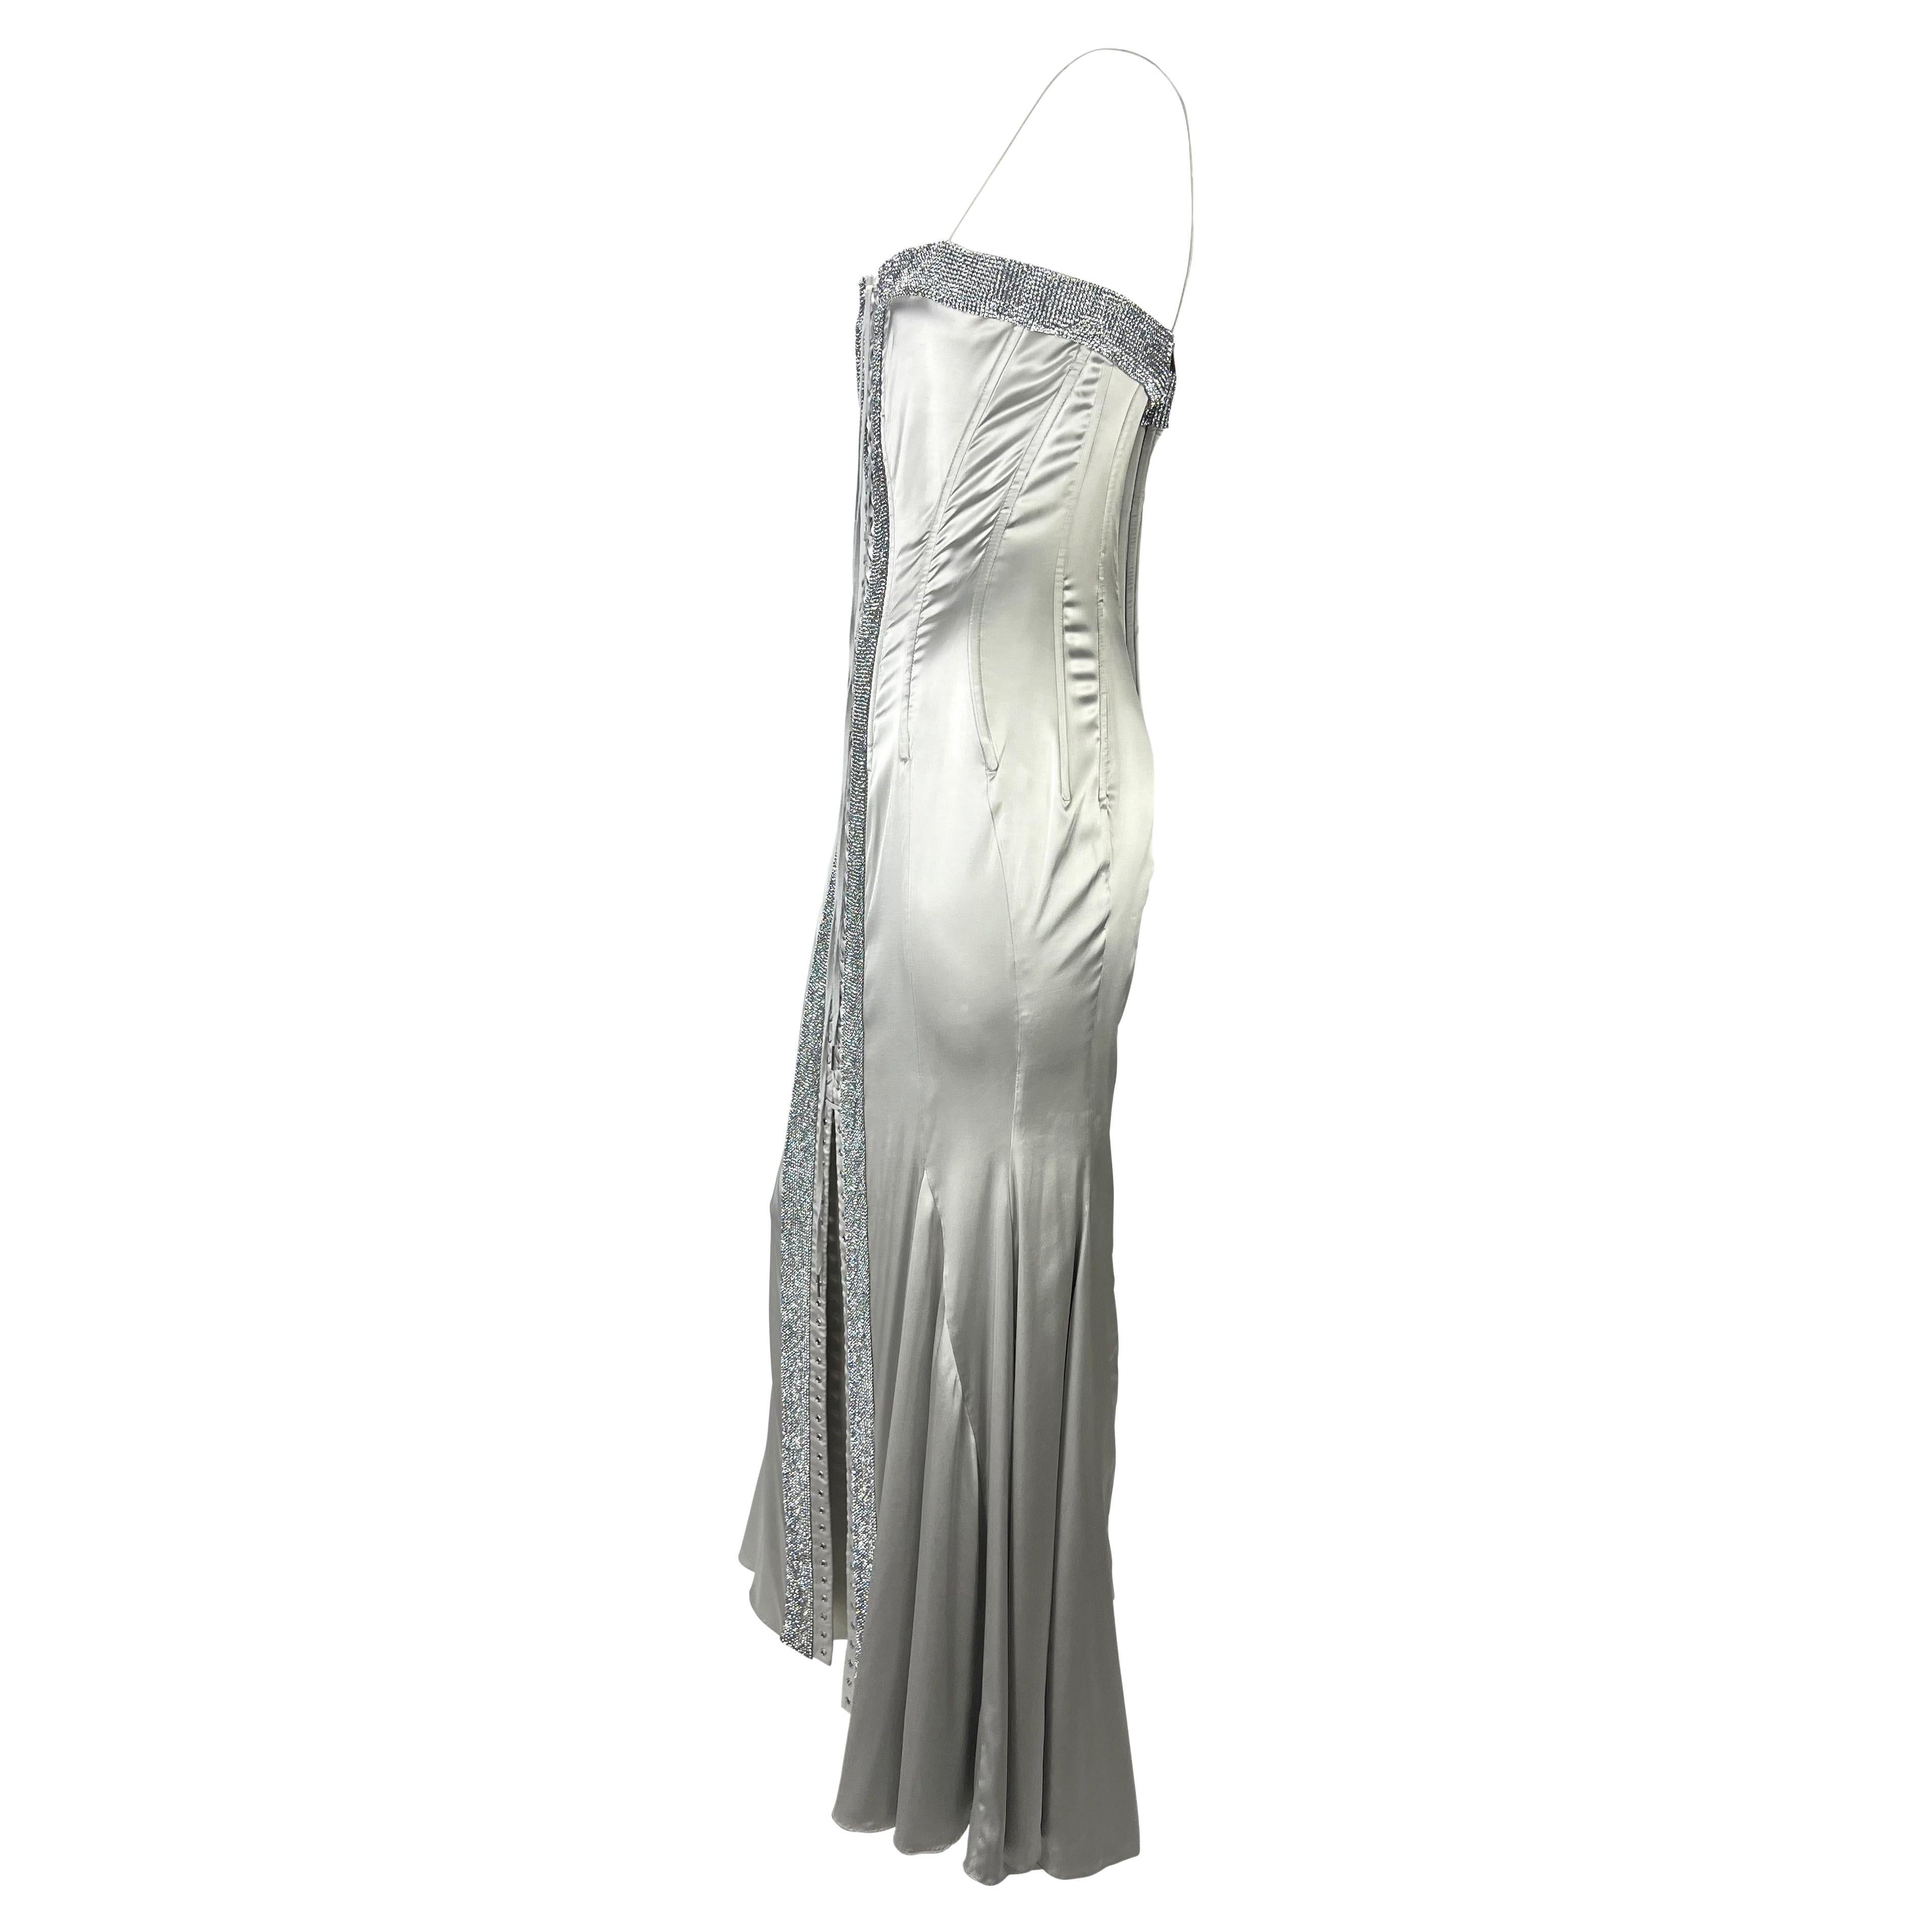 S/S 2004 Dolce & Gabbana Runway Rhinestone Lace-Up Silver Stretch Satin Gown 5